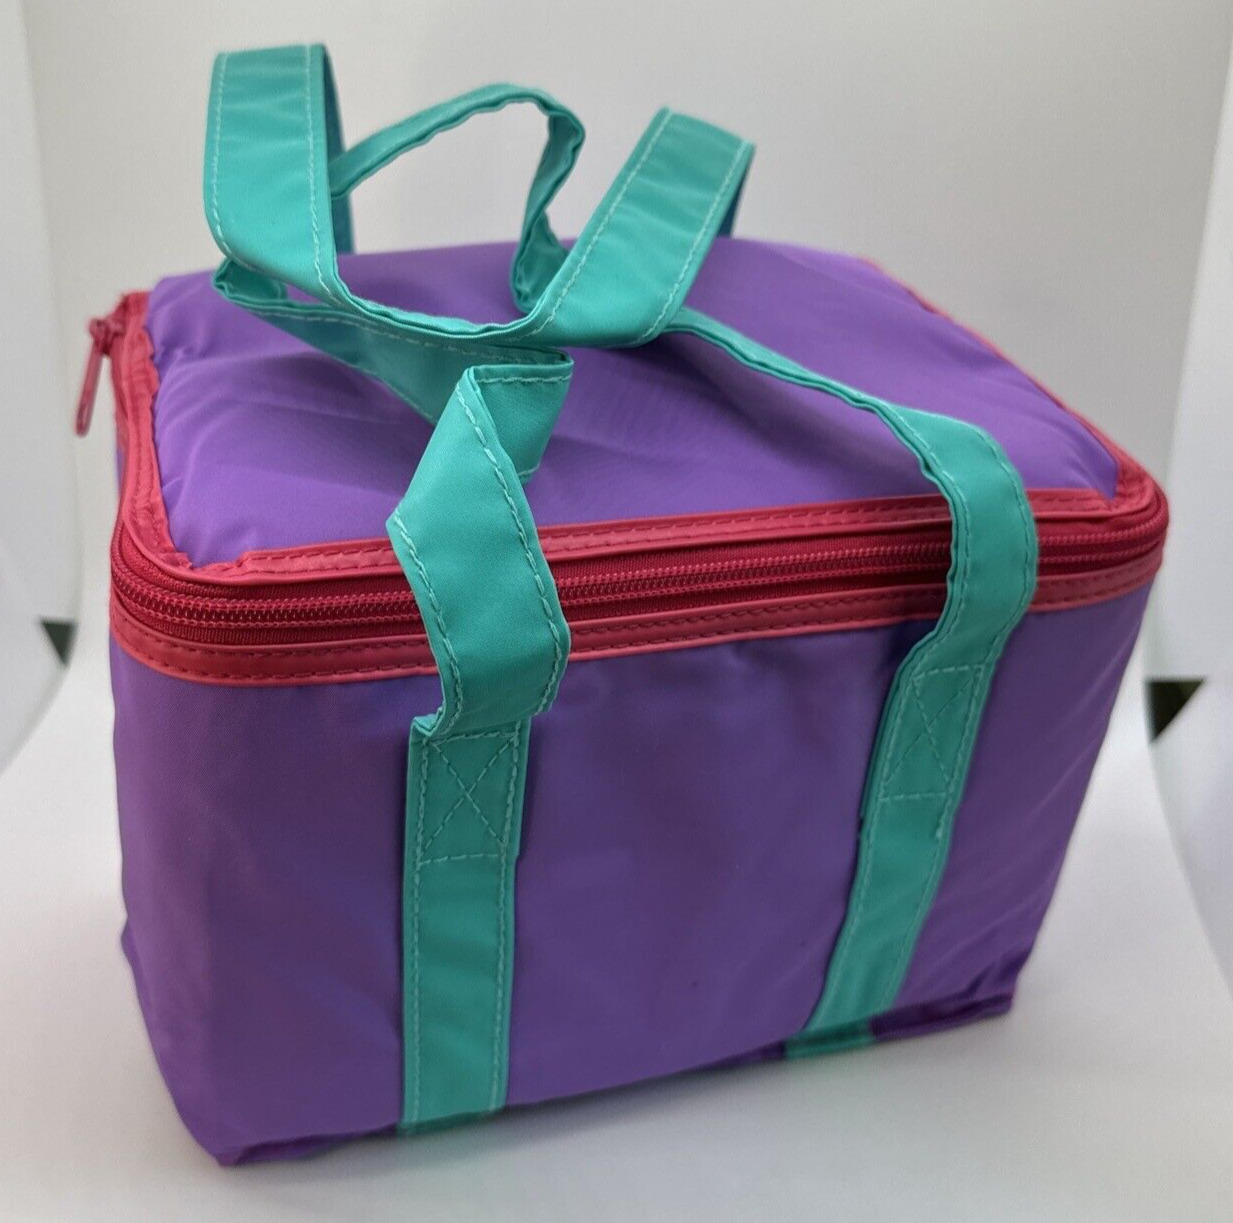 Tupperware Insulated 6 Pack Cooler RETRO Lunch Bag Purple Pink Teal Rare VTG NOS